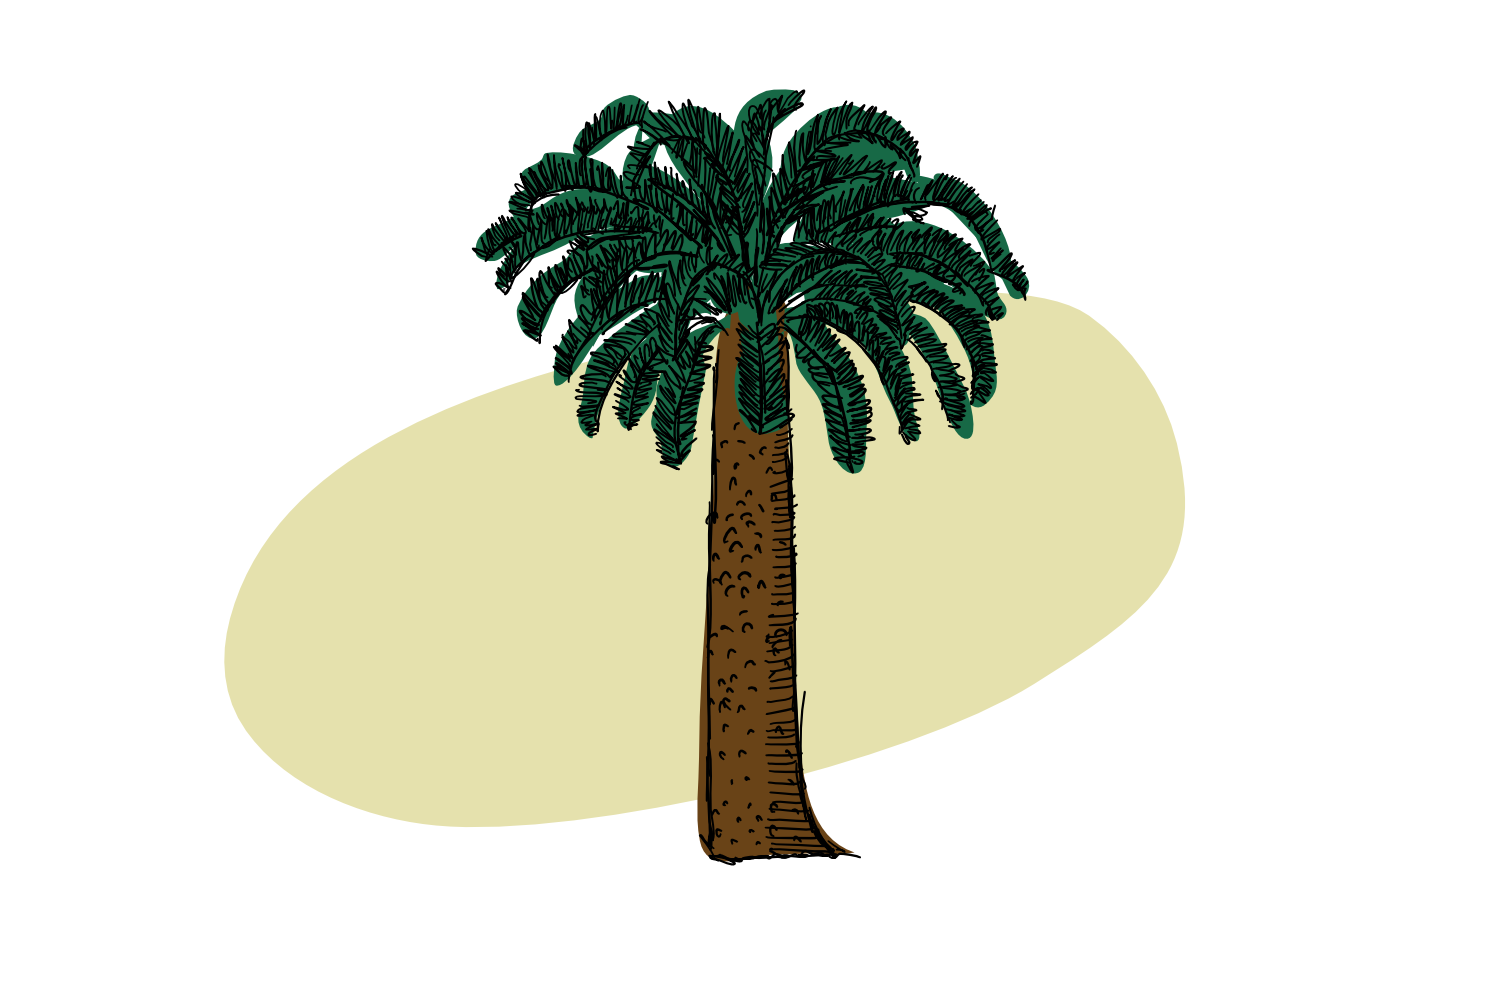 The Isolated Cycad